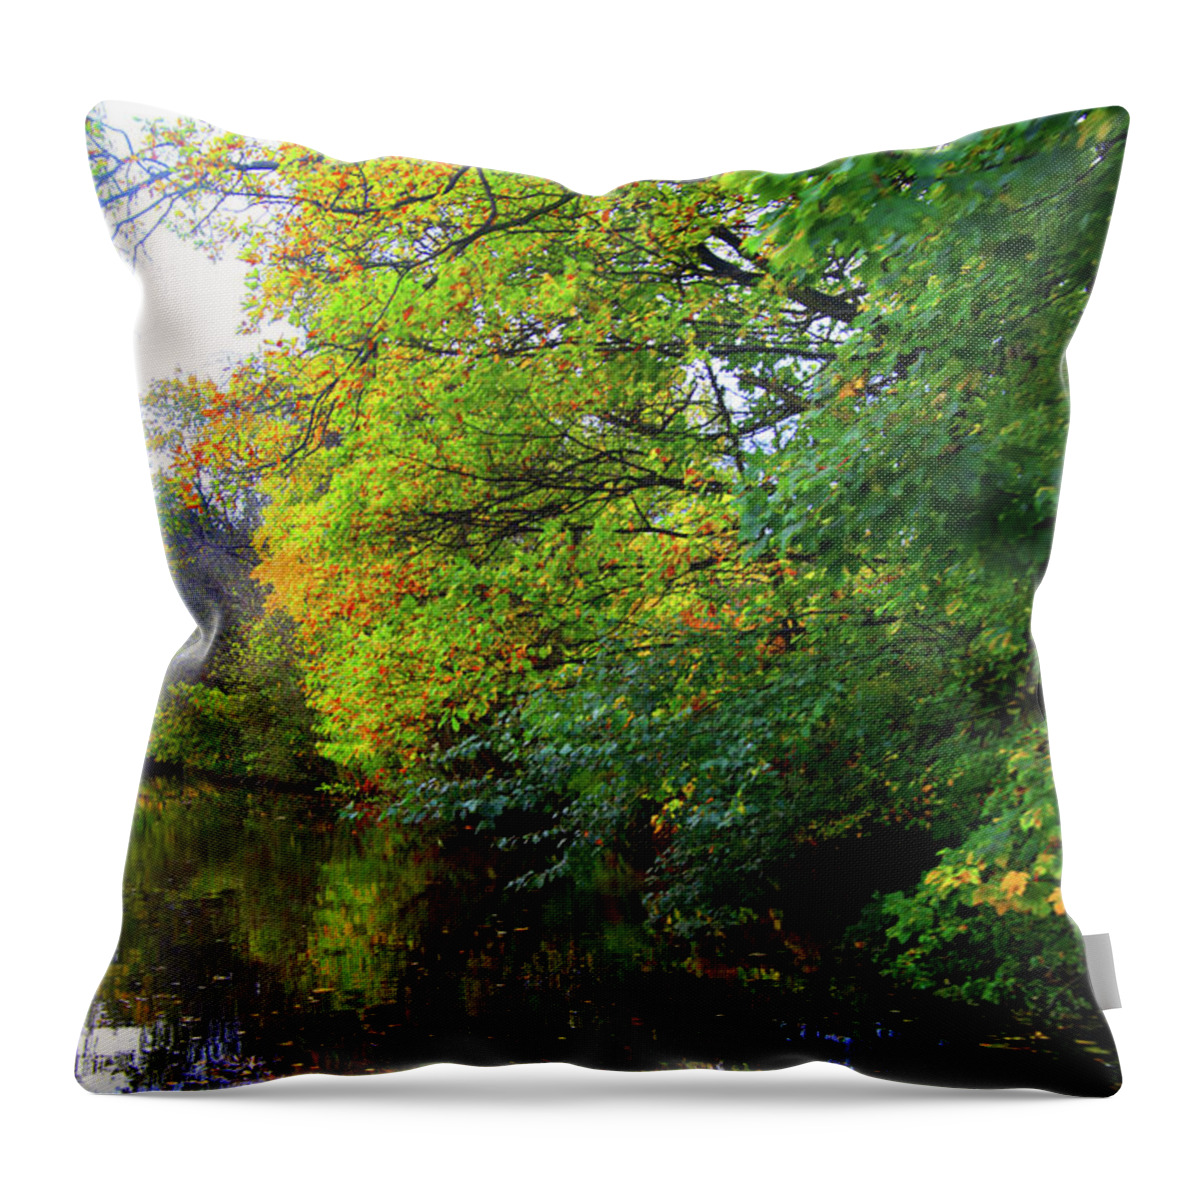 Canal Throw Pillow featuring the photograph Surprise Trip by Jez C Self